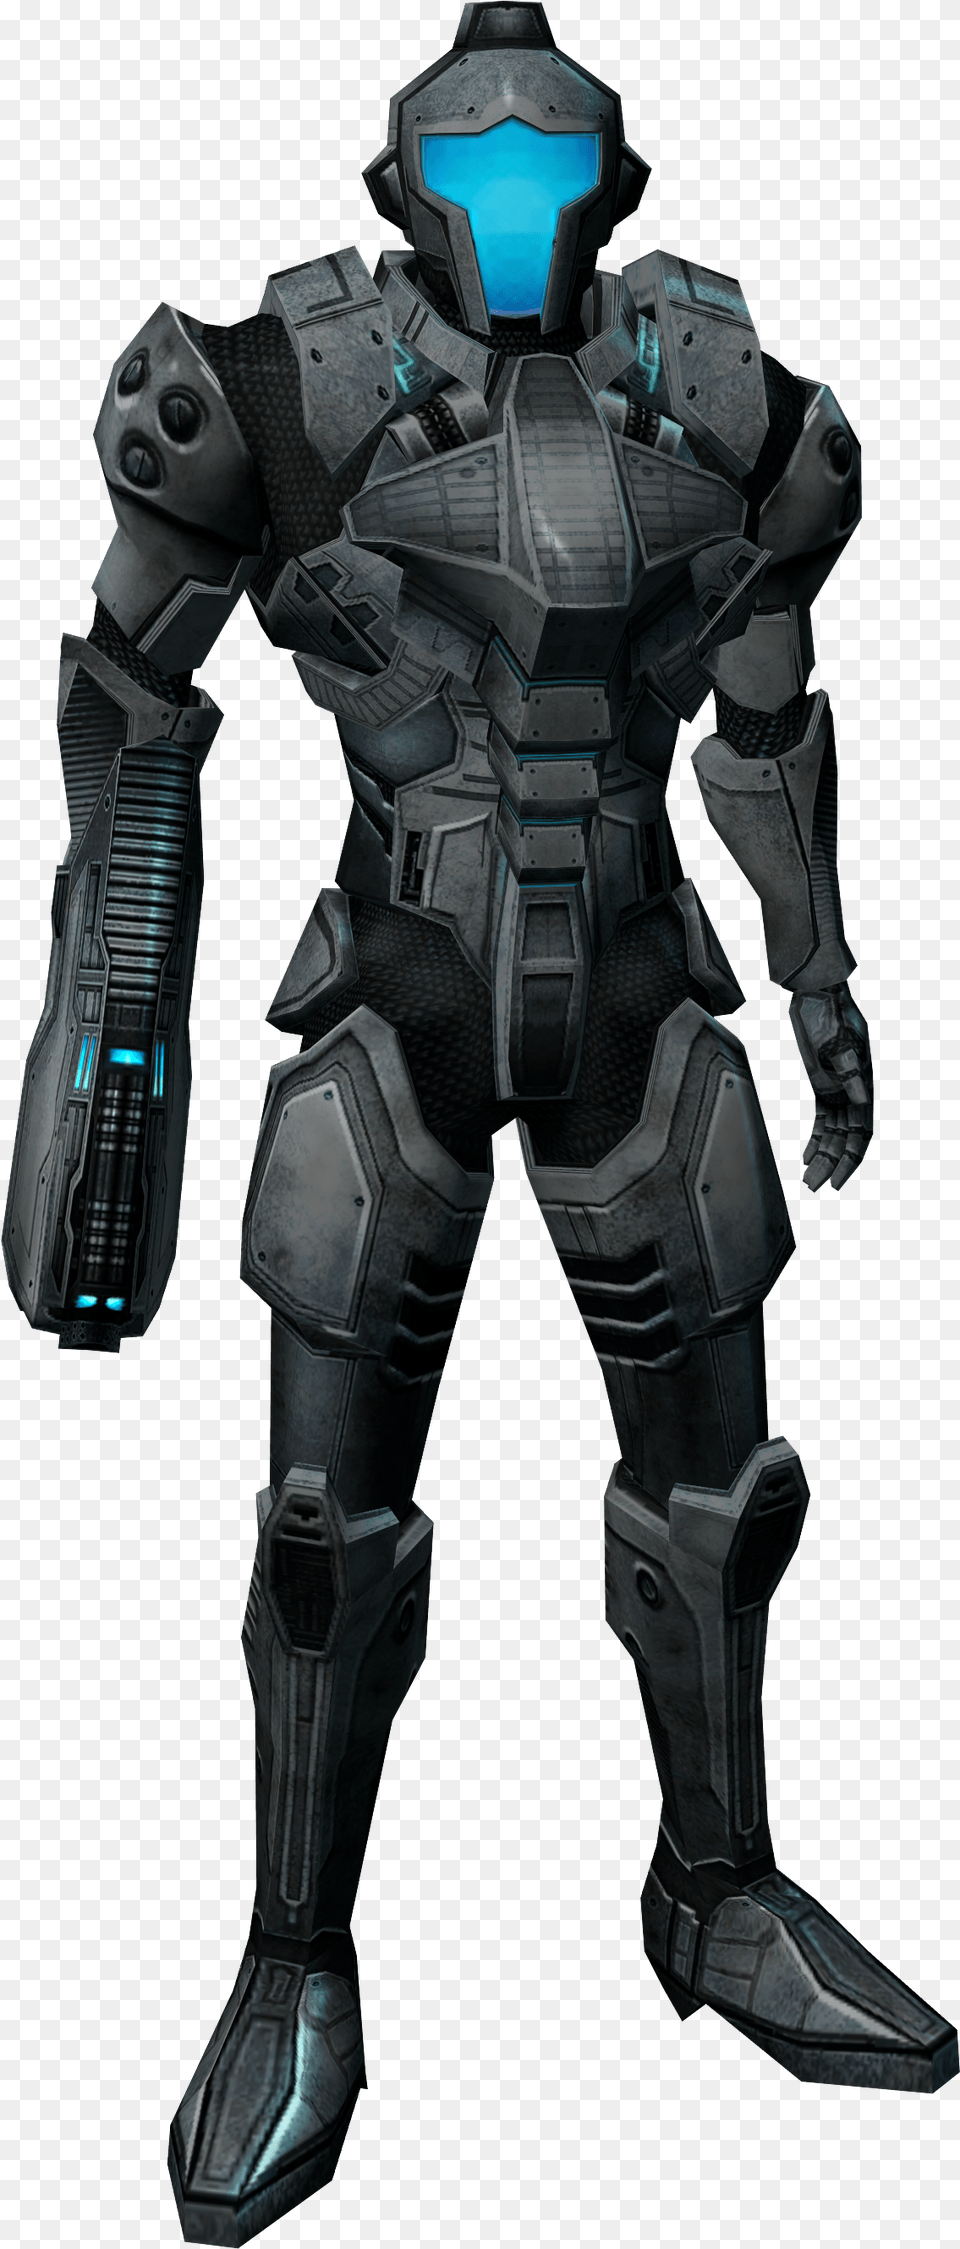 Posted Metroid Prime 3 Federation Trooper, Adult, Male, Man, Person Png Image